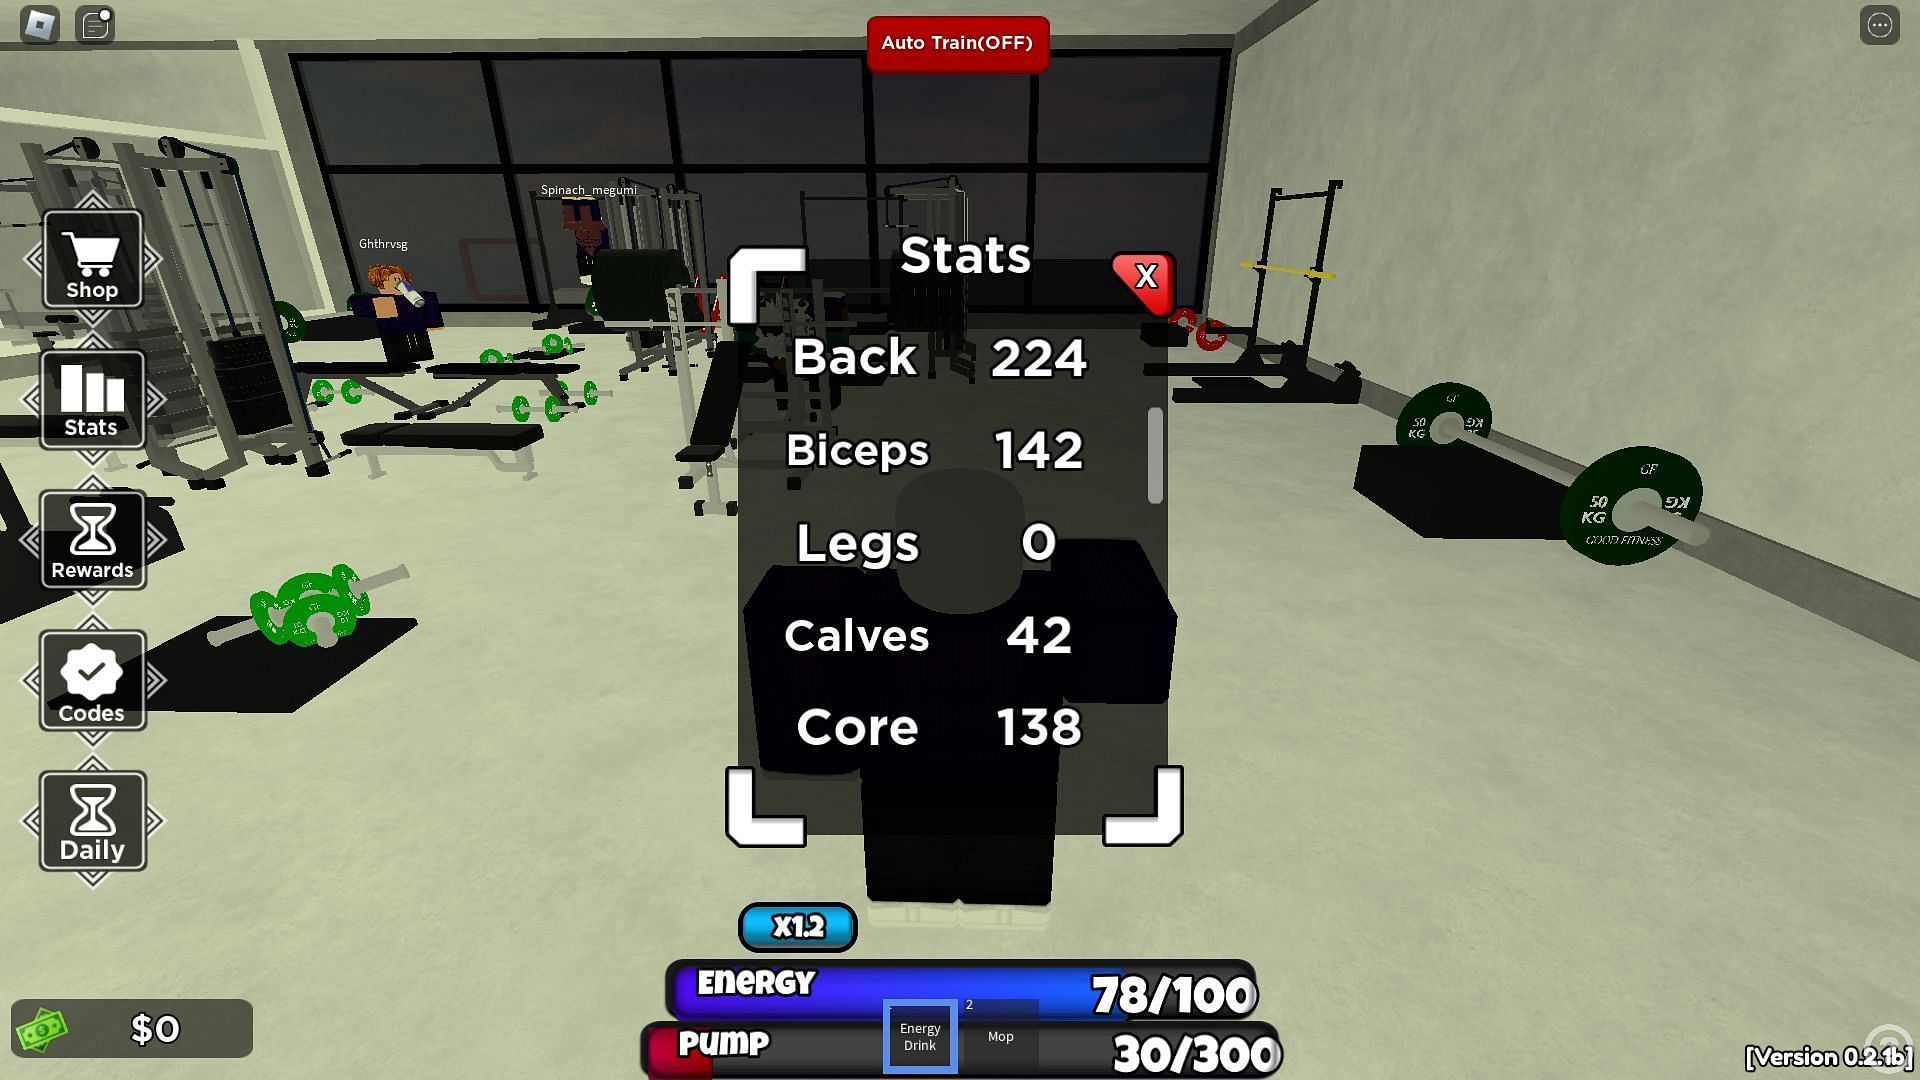 Muscle group stats (Image via Roblox)